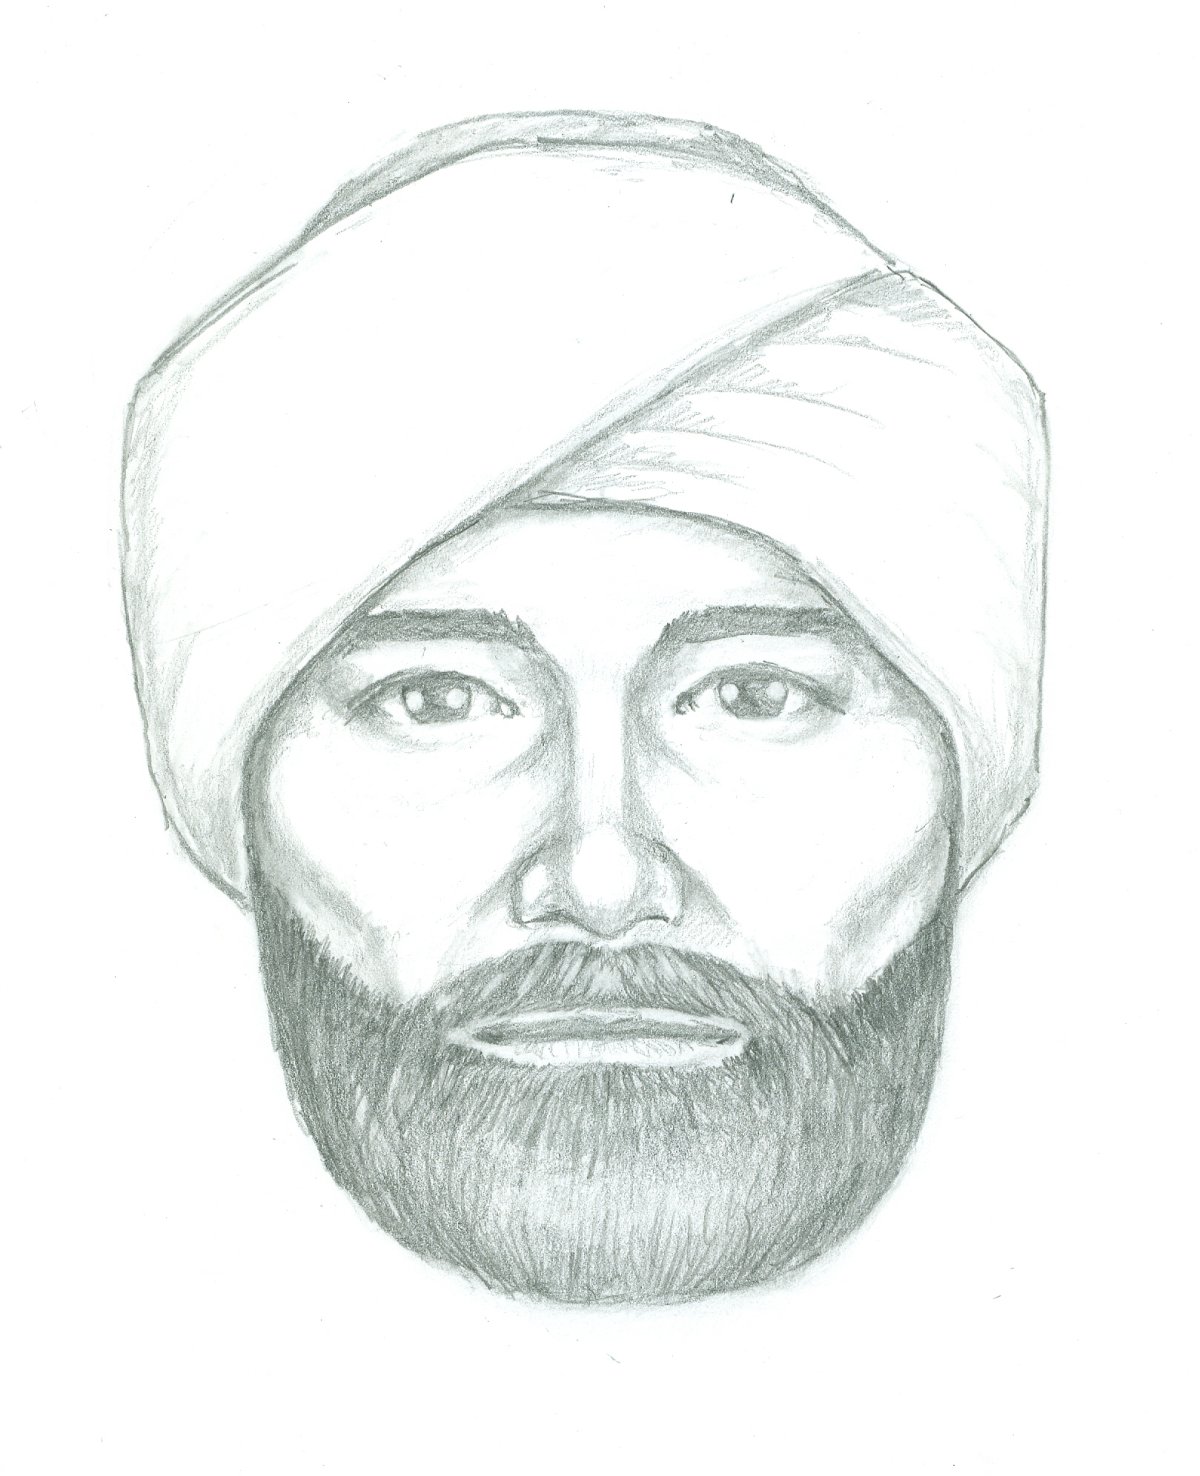 Police have released a composite sketch of the suspect of an alleged sexual assault that took place last weekend.